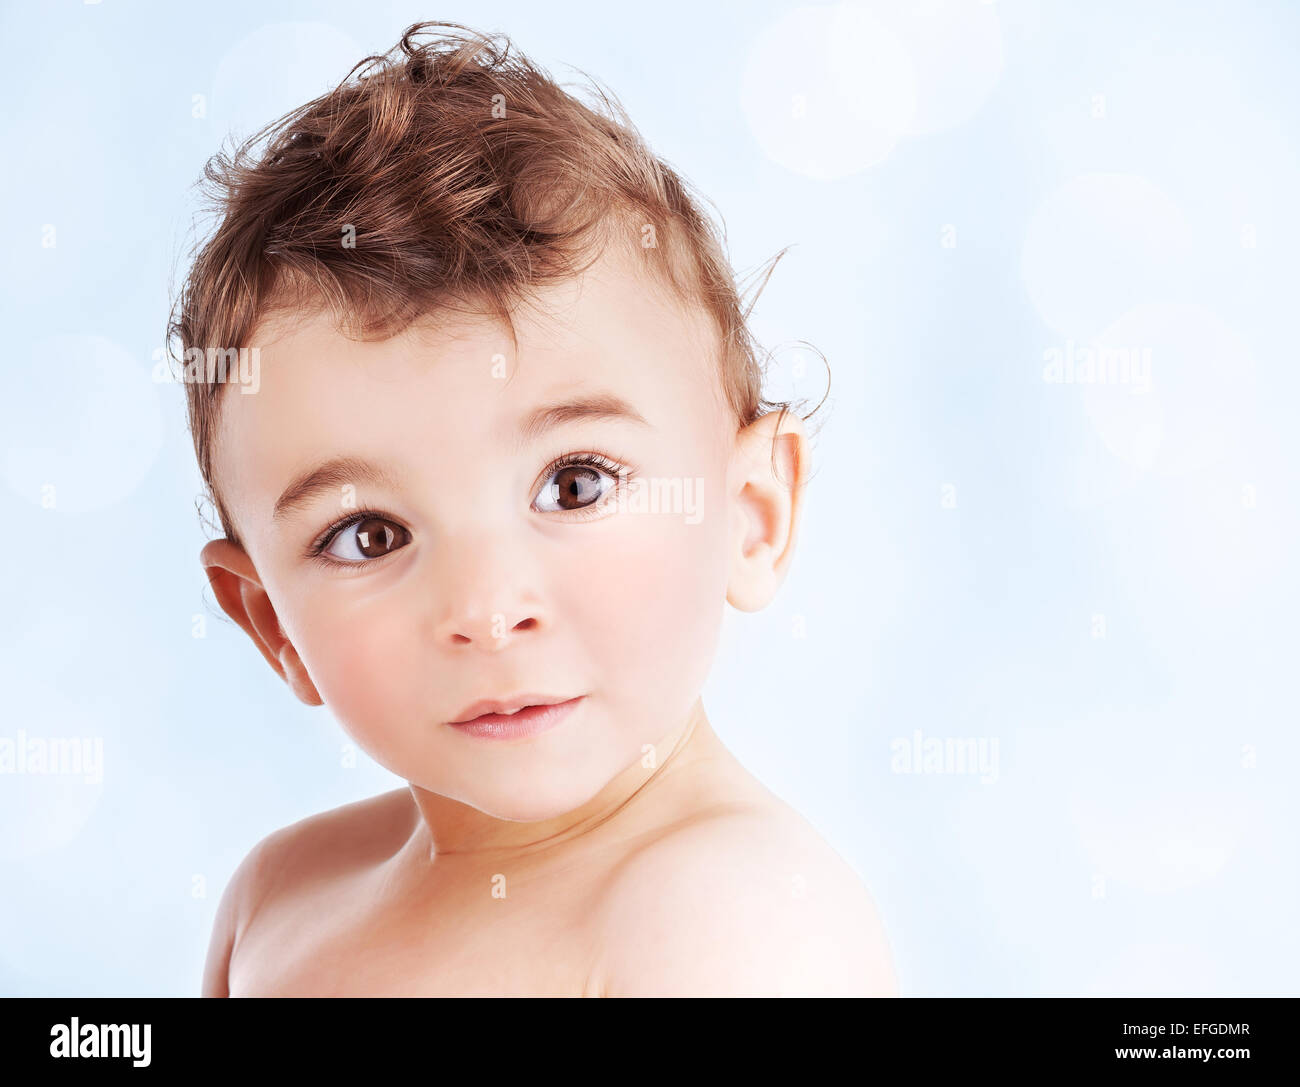 Cute baby boy over blue background, portrait with a copy space of an adorable sweet child, nice kid model indoor Stock Photo